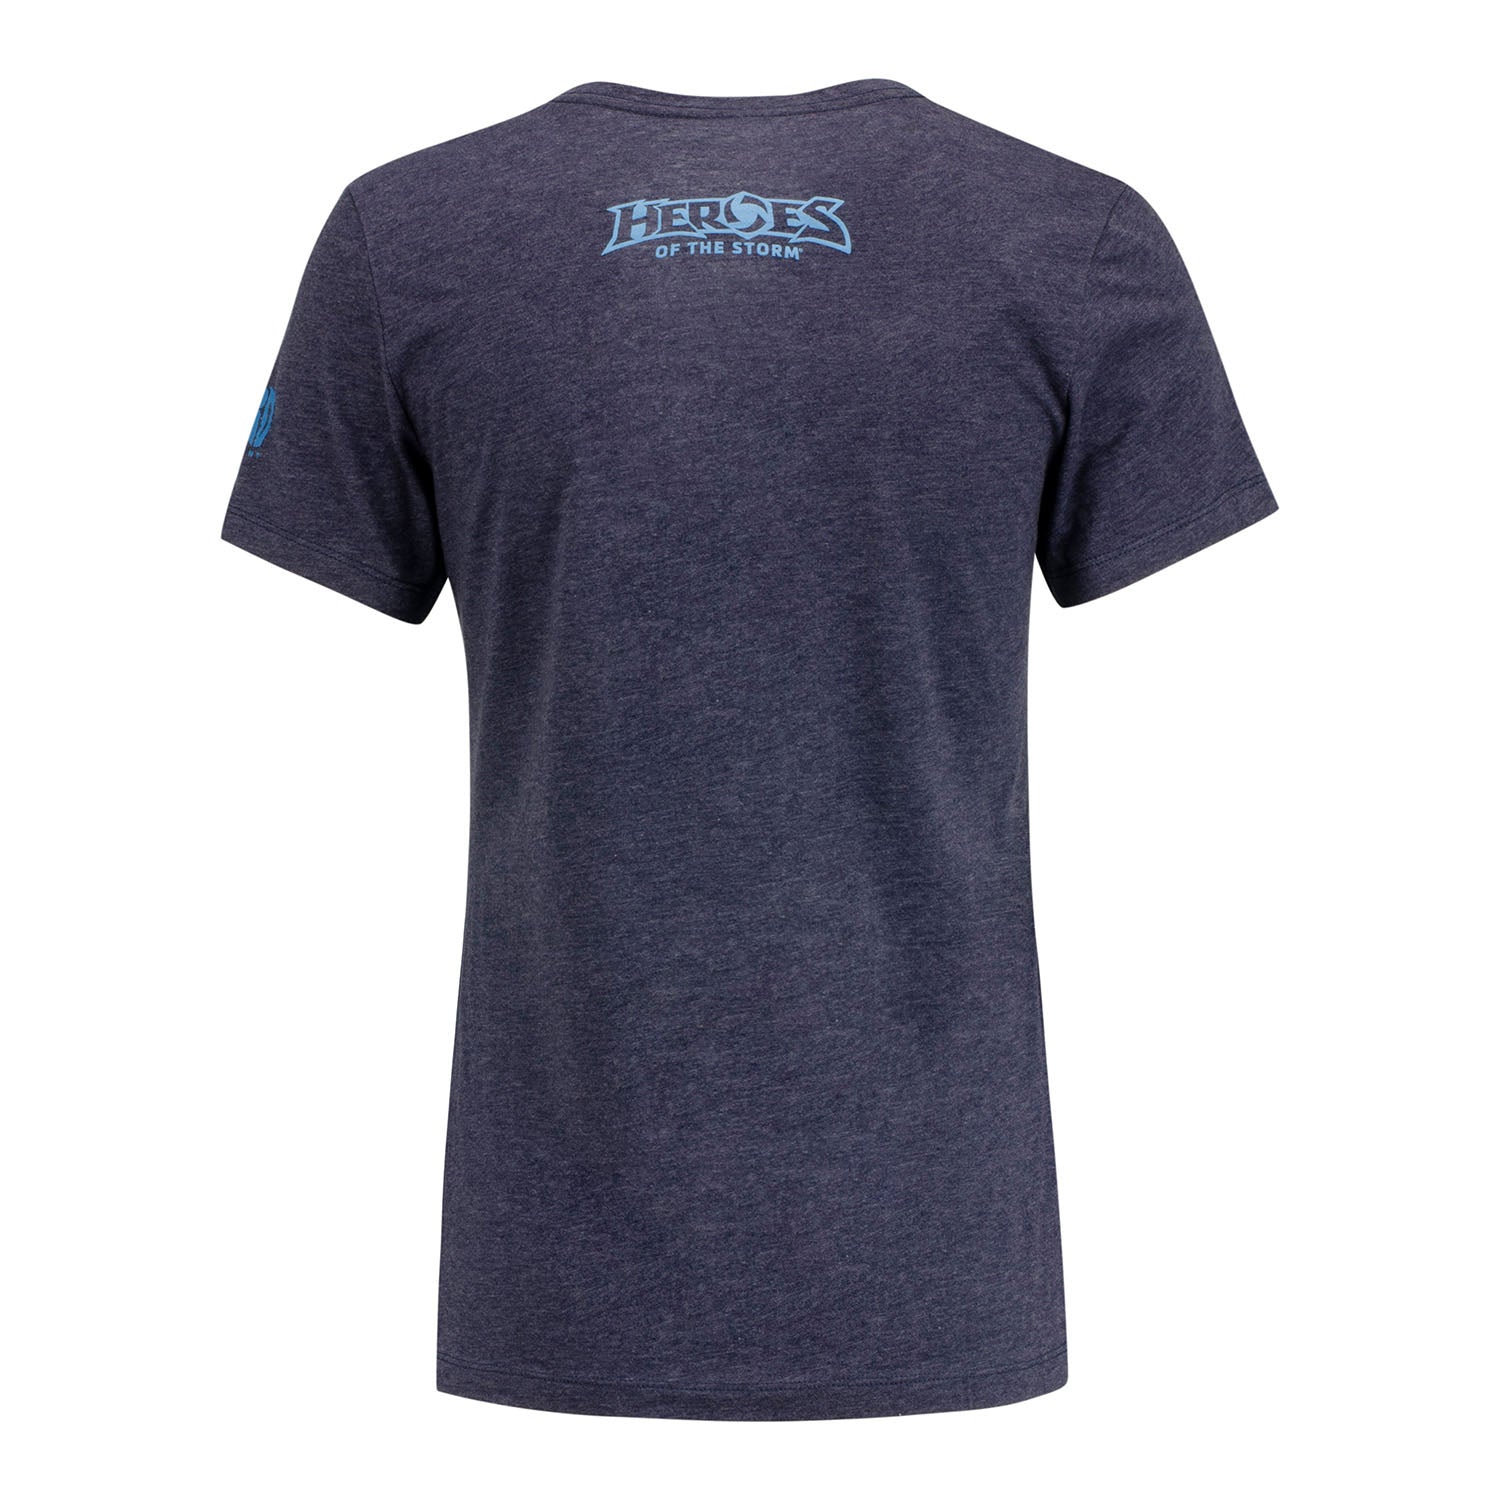 Heroes of the Storm Women's Heathered Navy Hexagon V-Neck T-Shirt - Back View